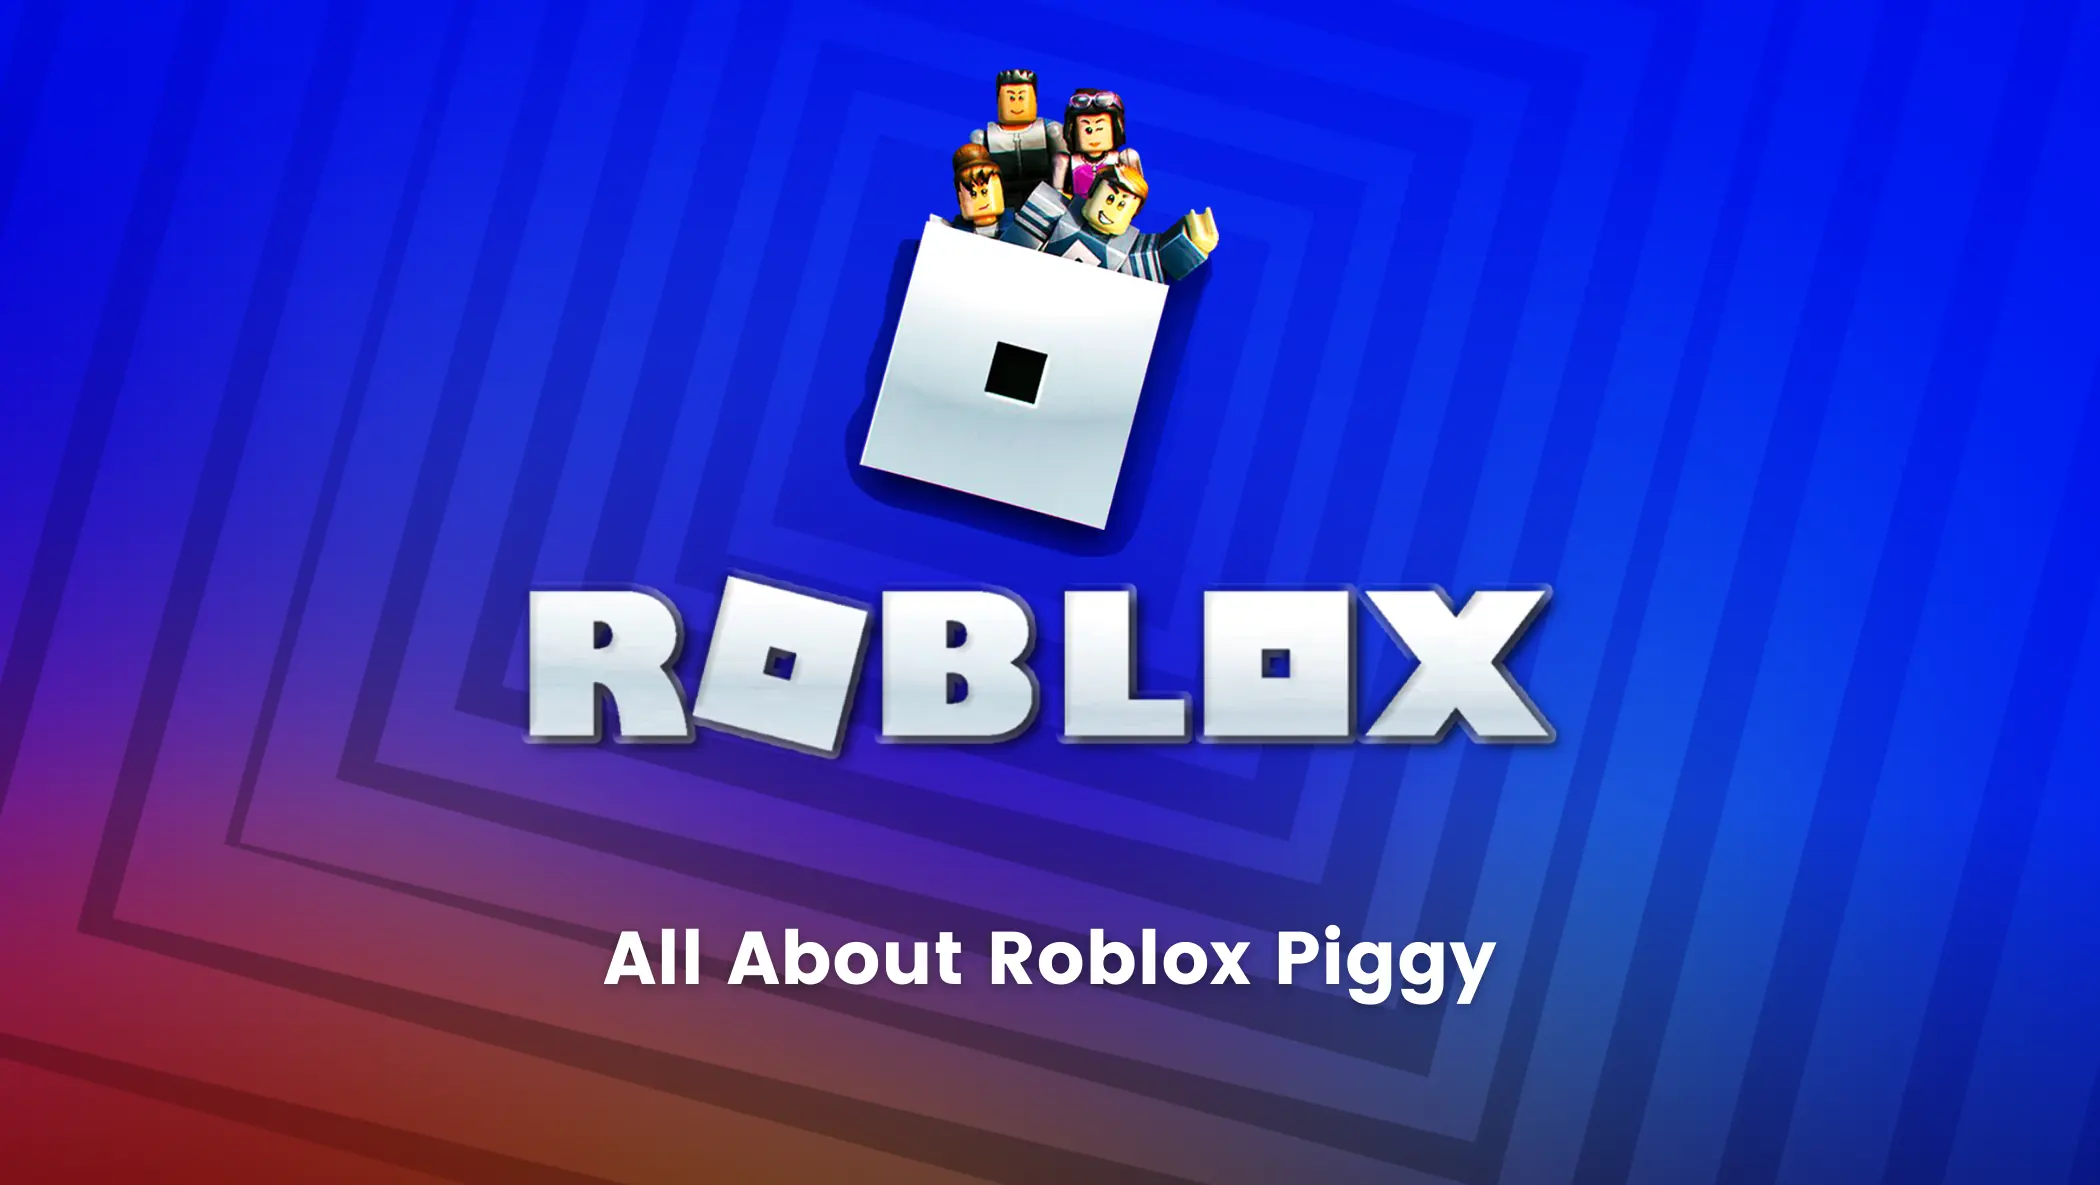 All About Roblox Piggy